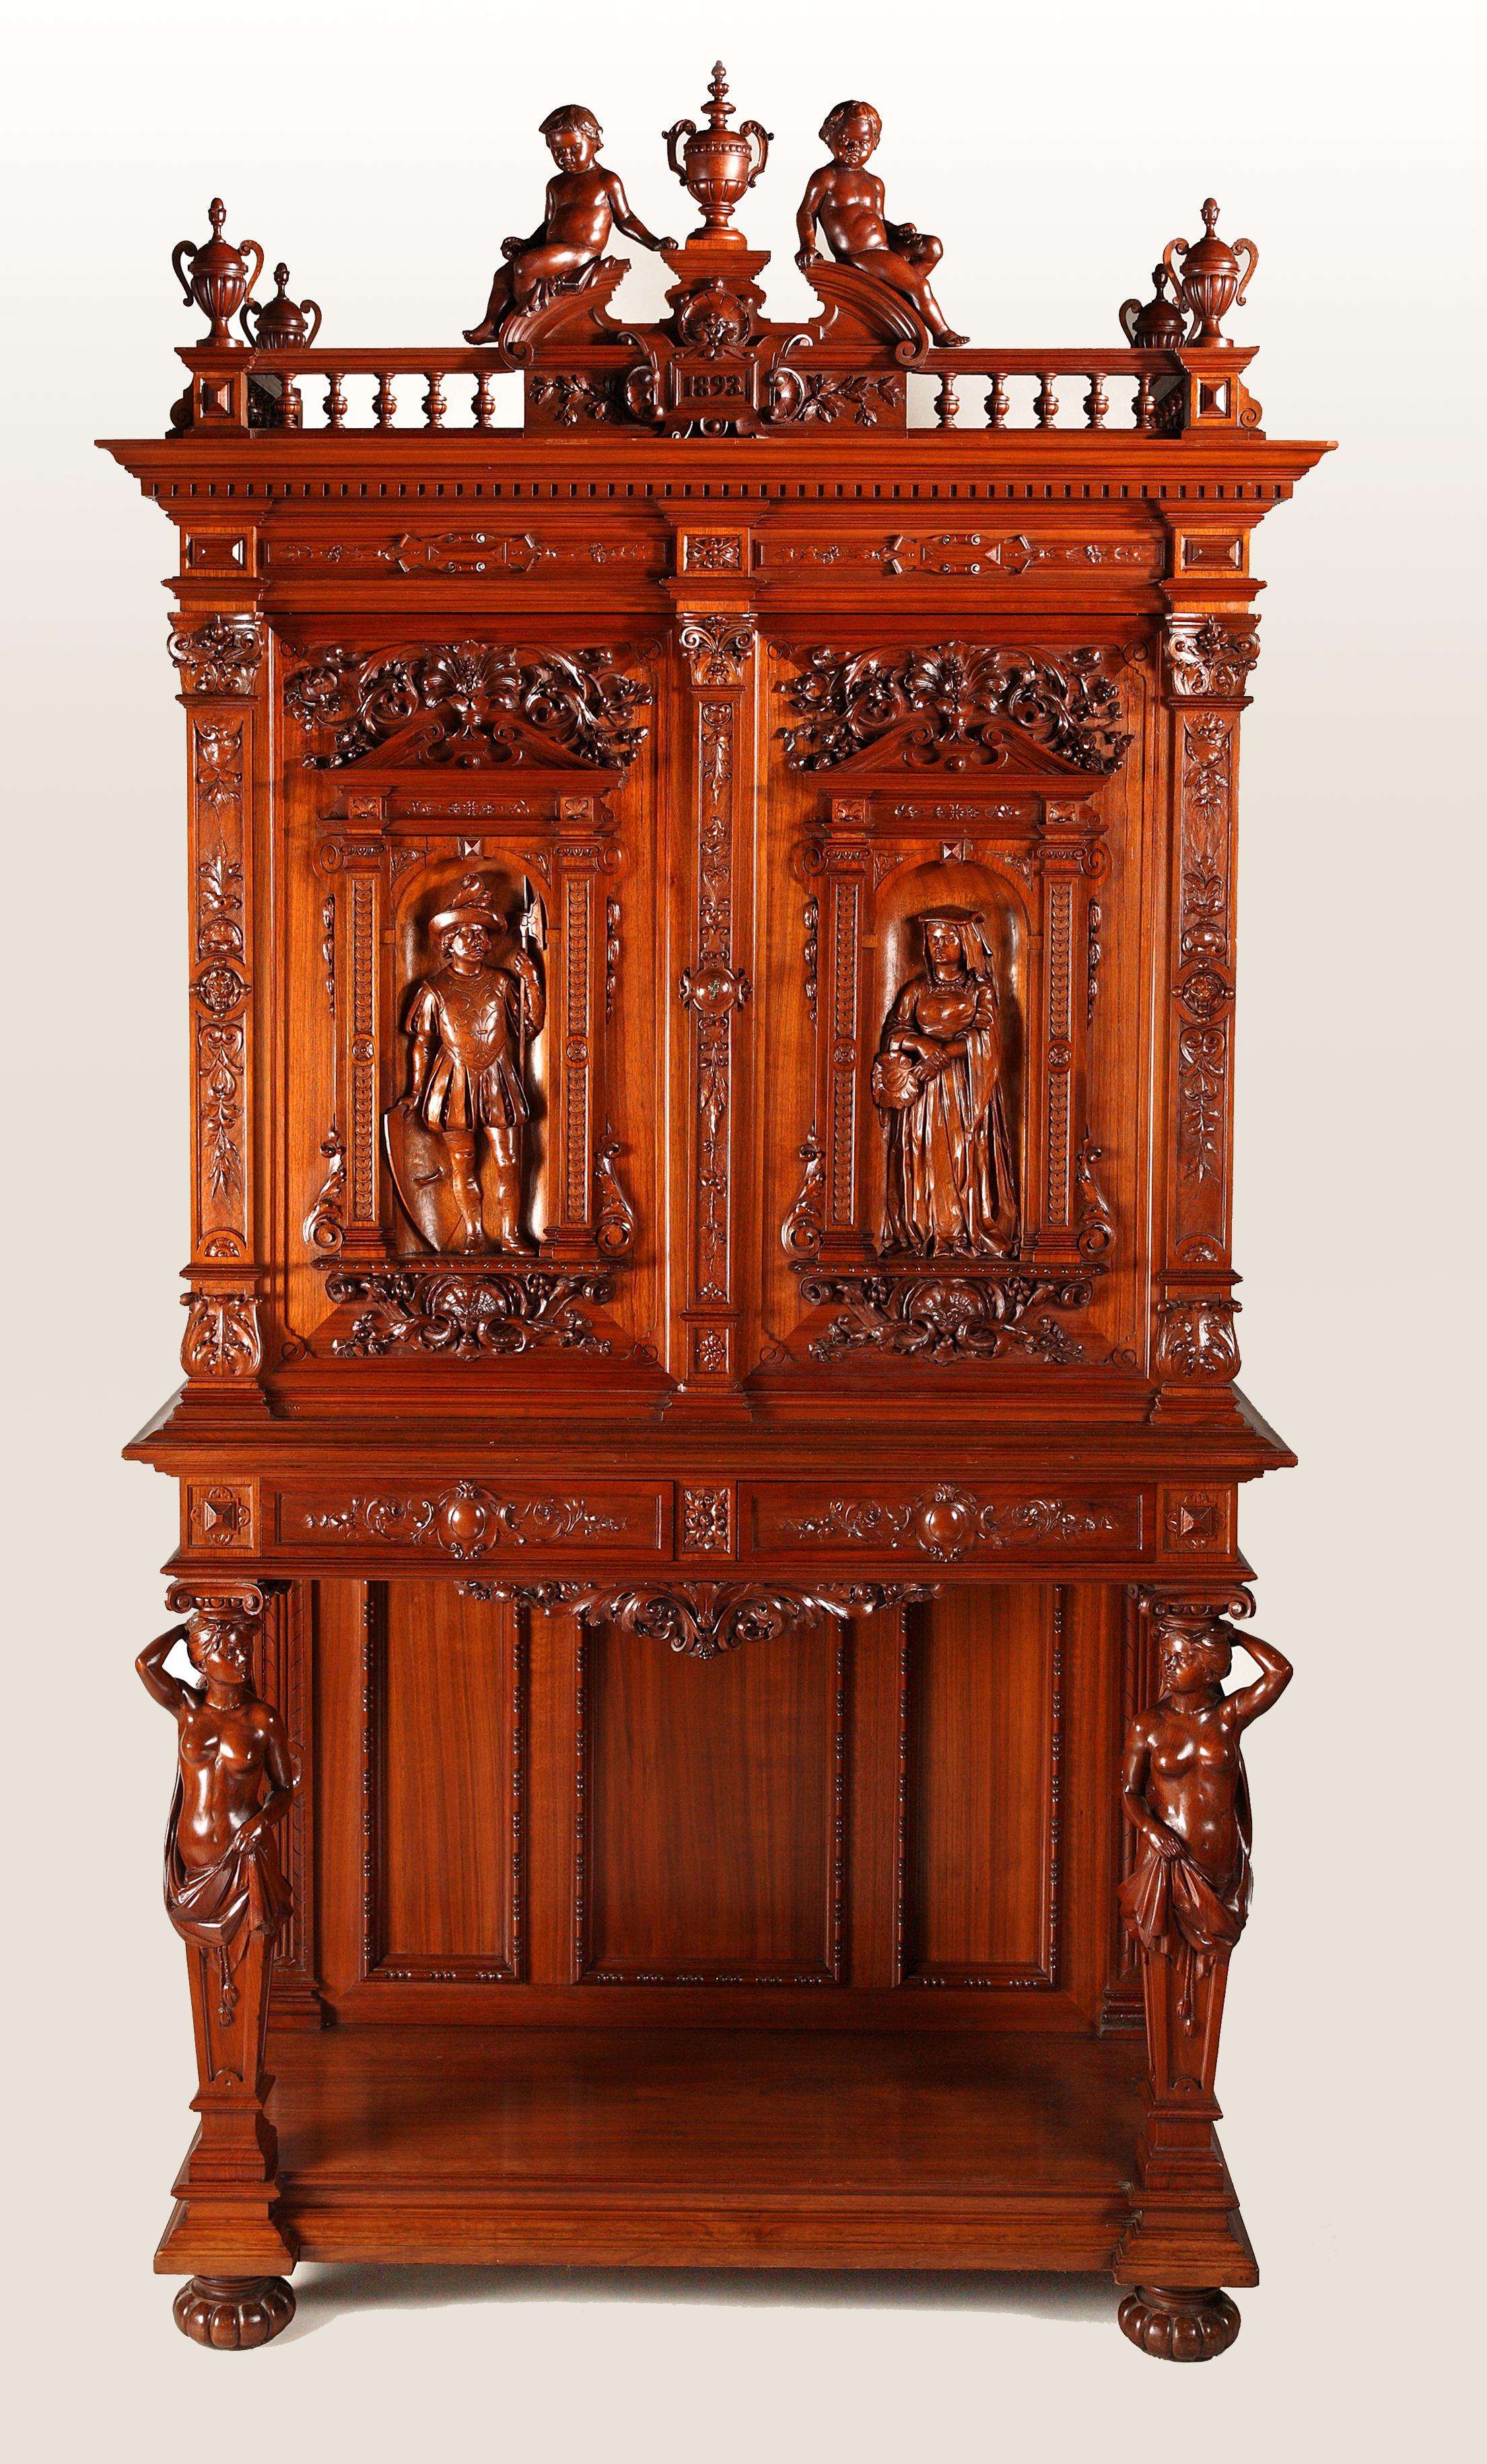 A wooden cupboard, elaborately carved throughout, dated 